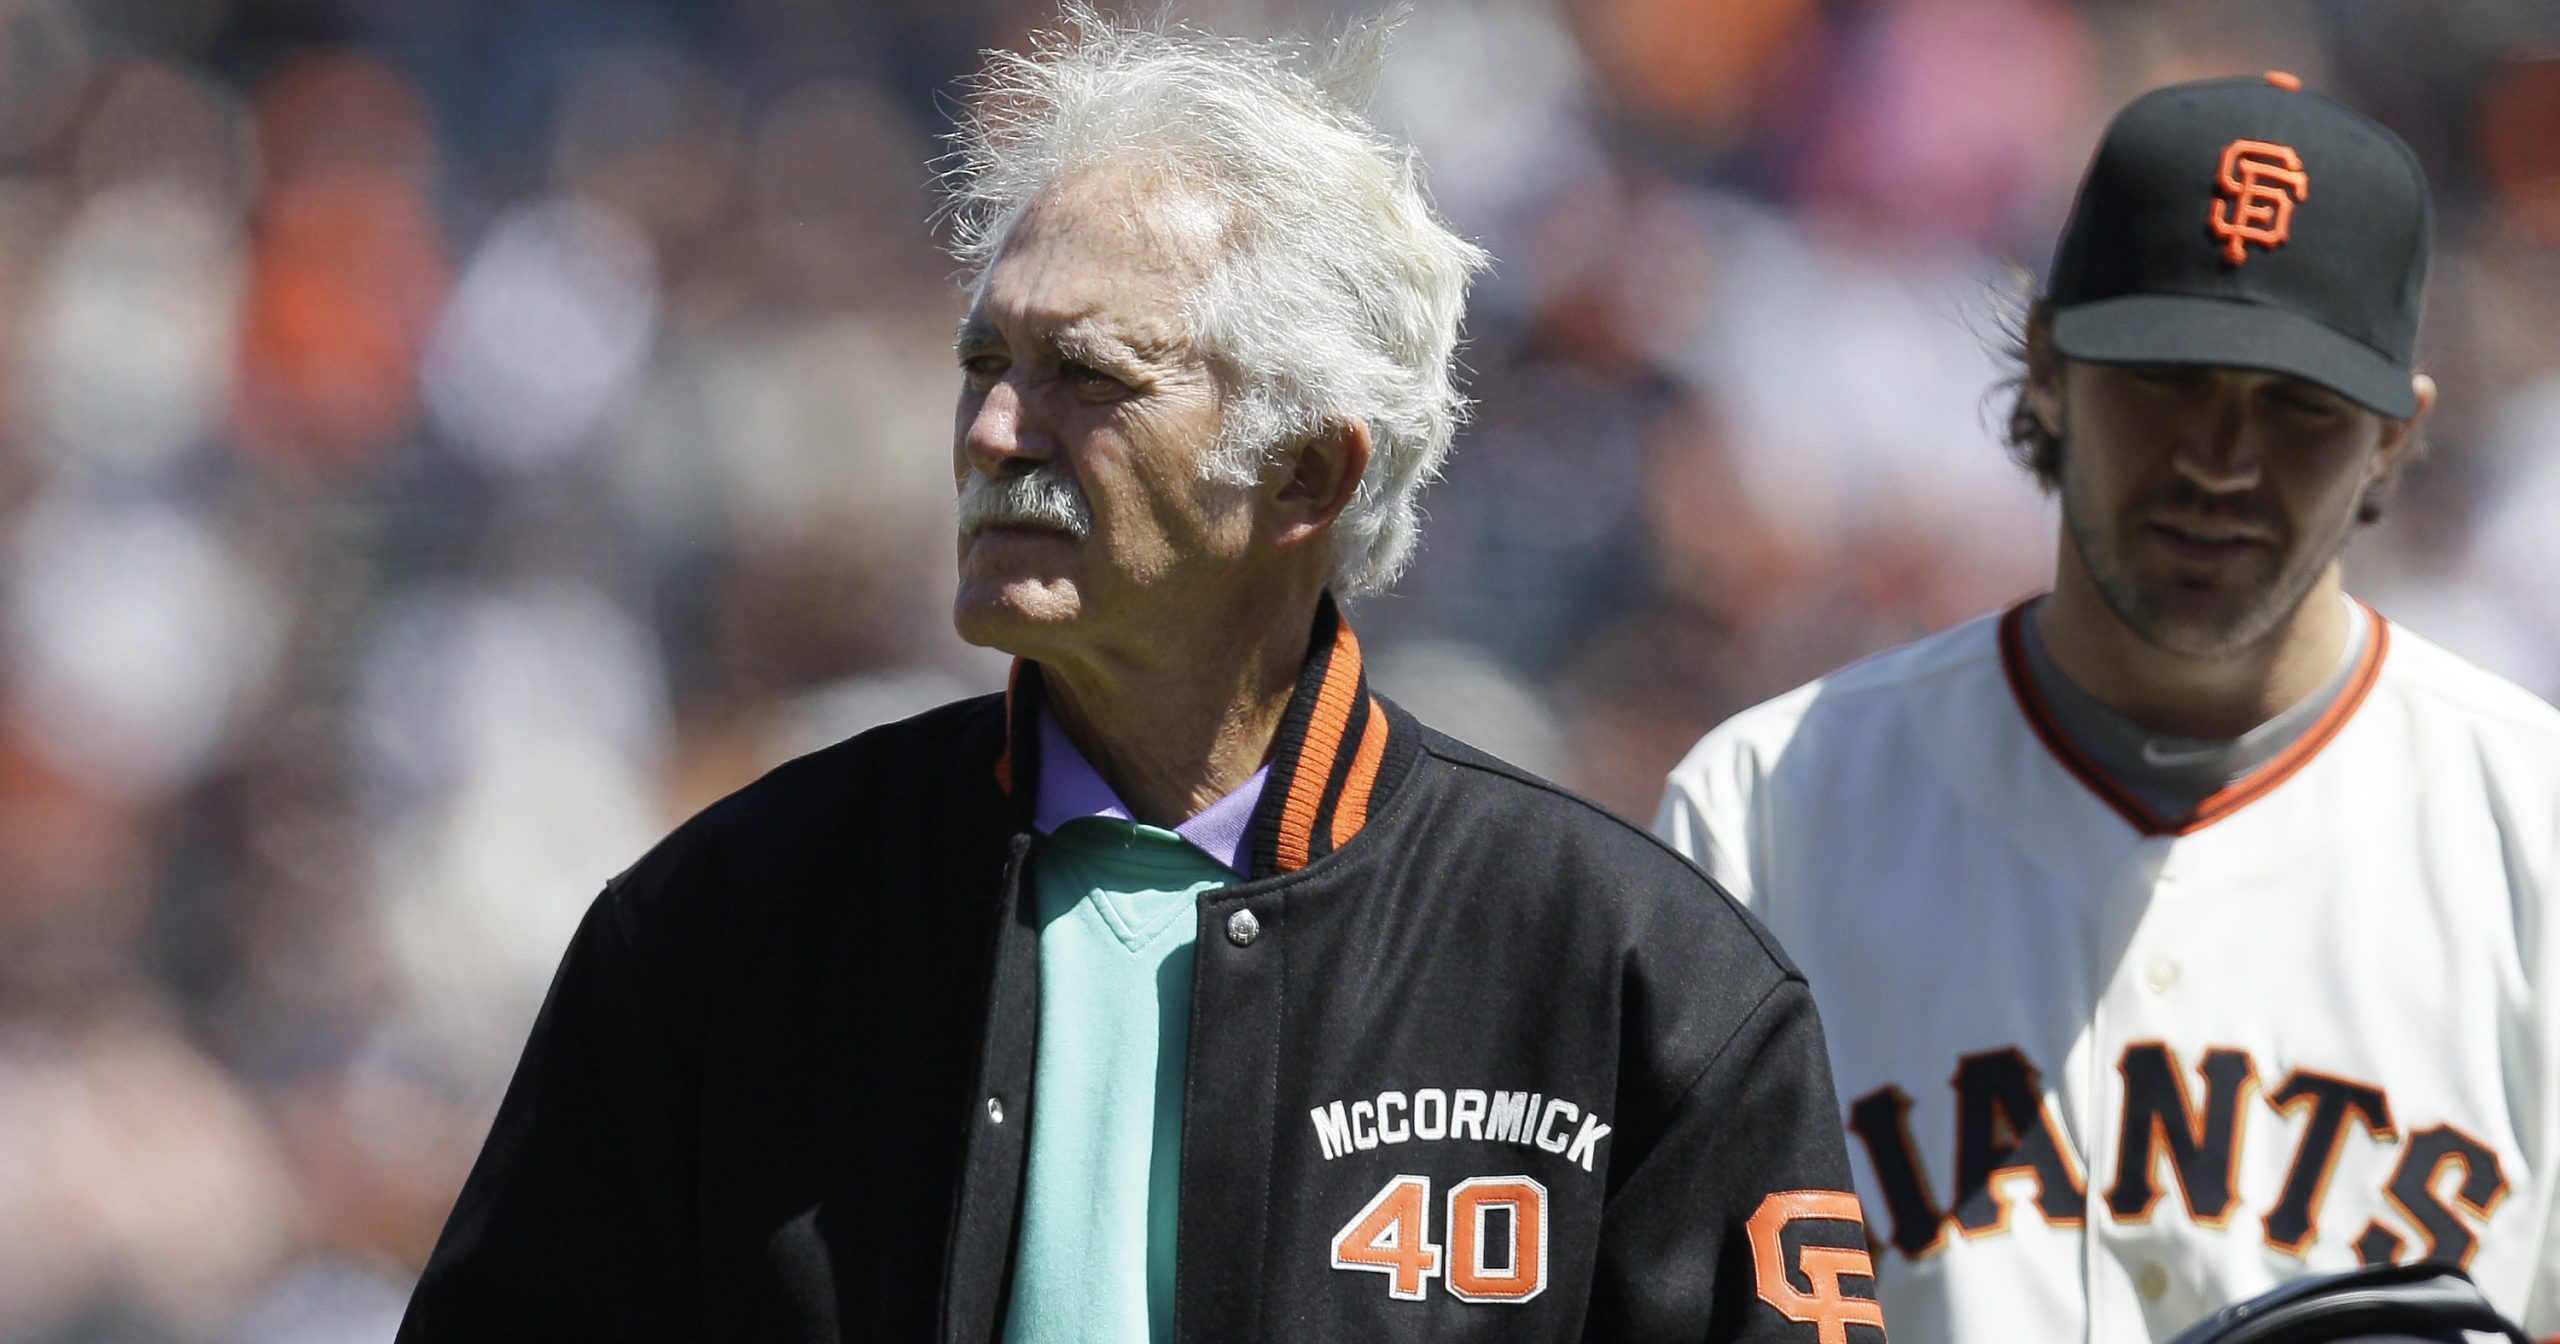 This April 13, 2012, photo shows former San Francisco Giants pitcher Mike McCormick before a baseball game between the Giants and the Pittsburgh Pirates in San Francisco. McCormick, who won the Cy Young Award in 1967, died June 13, 2020, at his home in North Carolina after a long battle with Parkinson’s disease. He was 81.